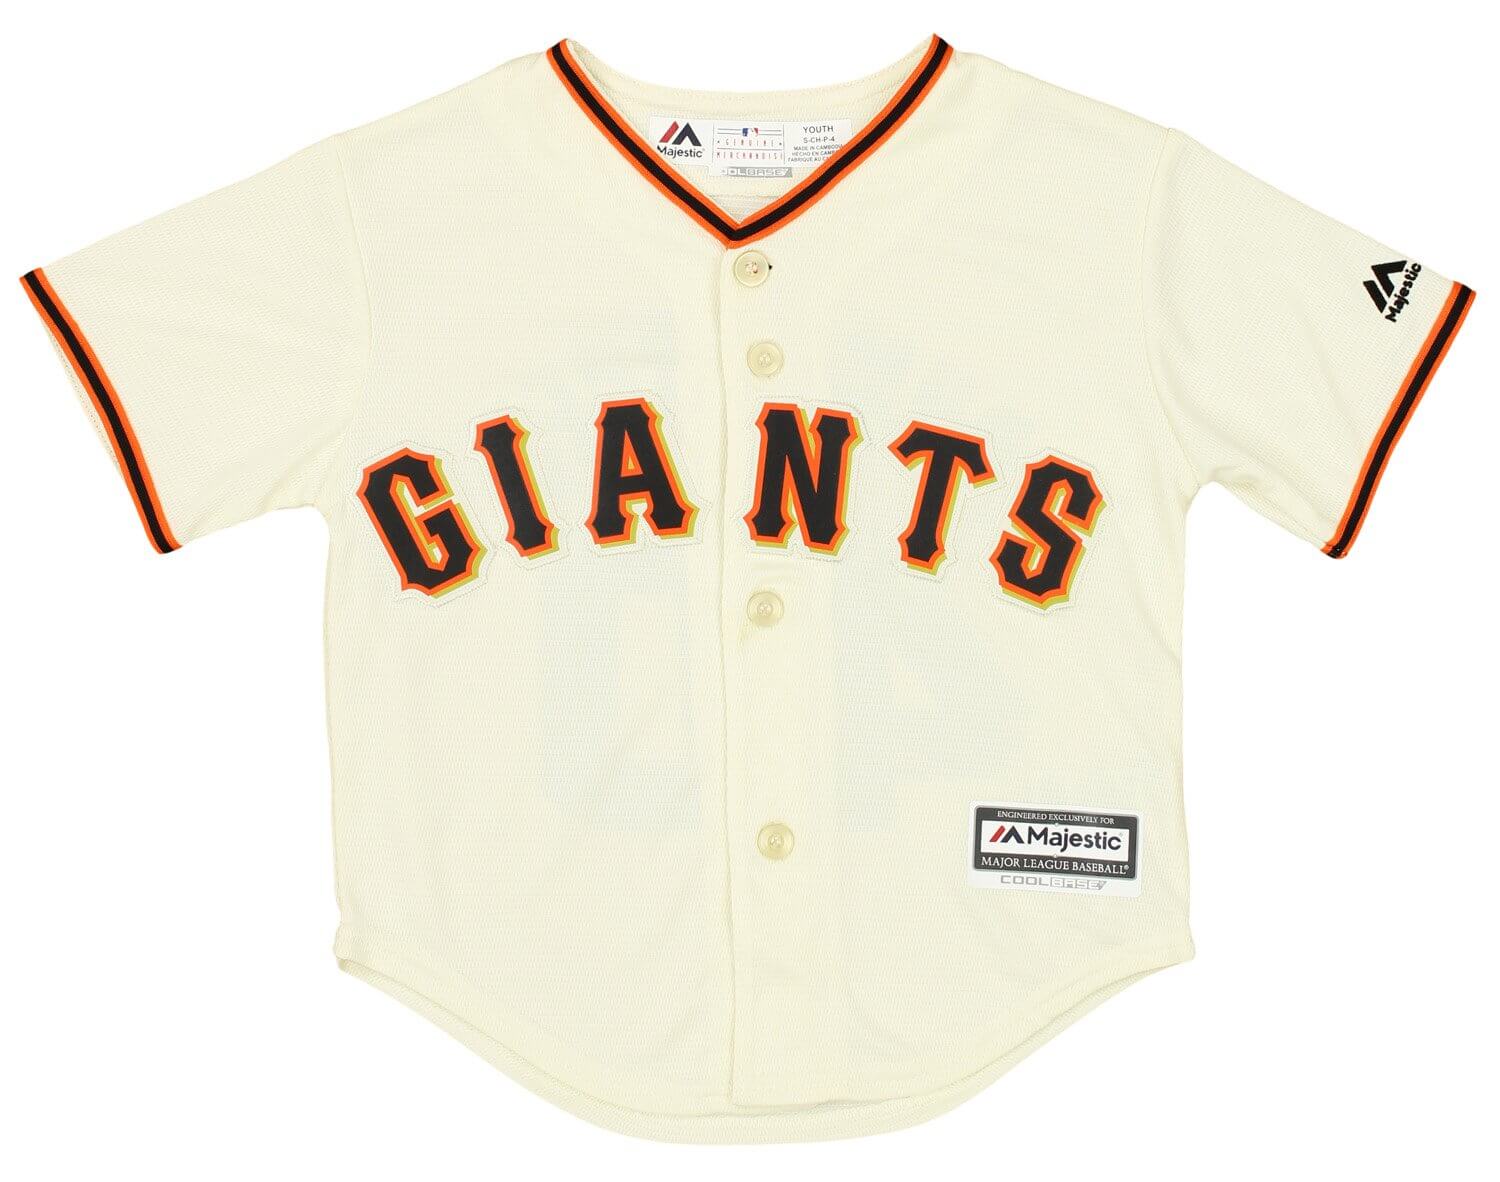 Men's San Francisco Giants #40 Madison Bumgarner 2015 Cream World Series  Gold Program Jersey on sale,for Cheap,wholesale from China